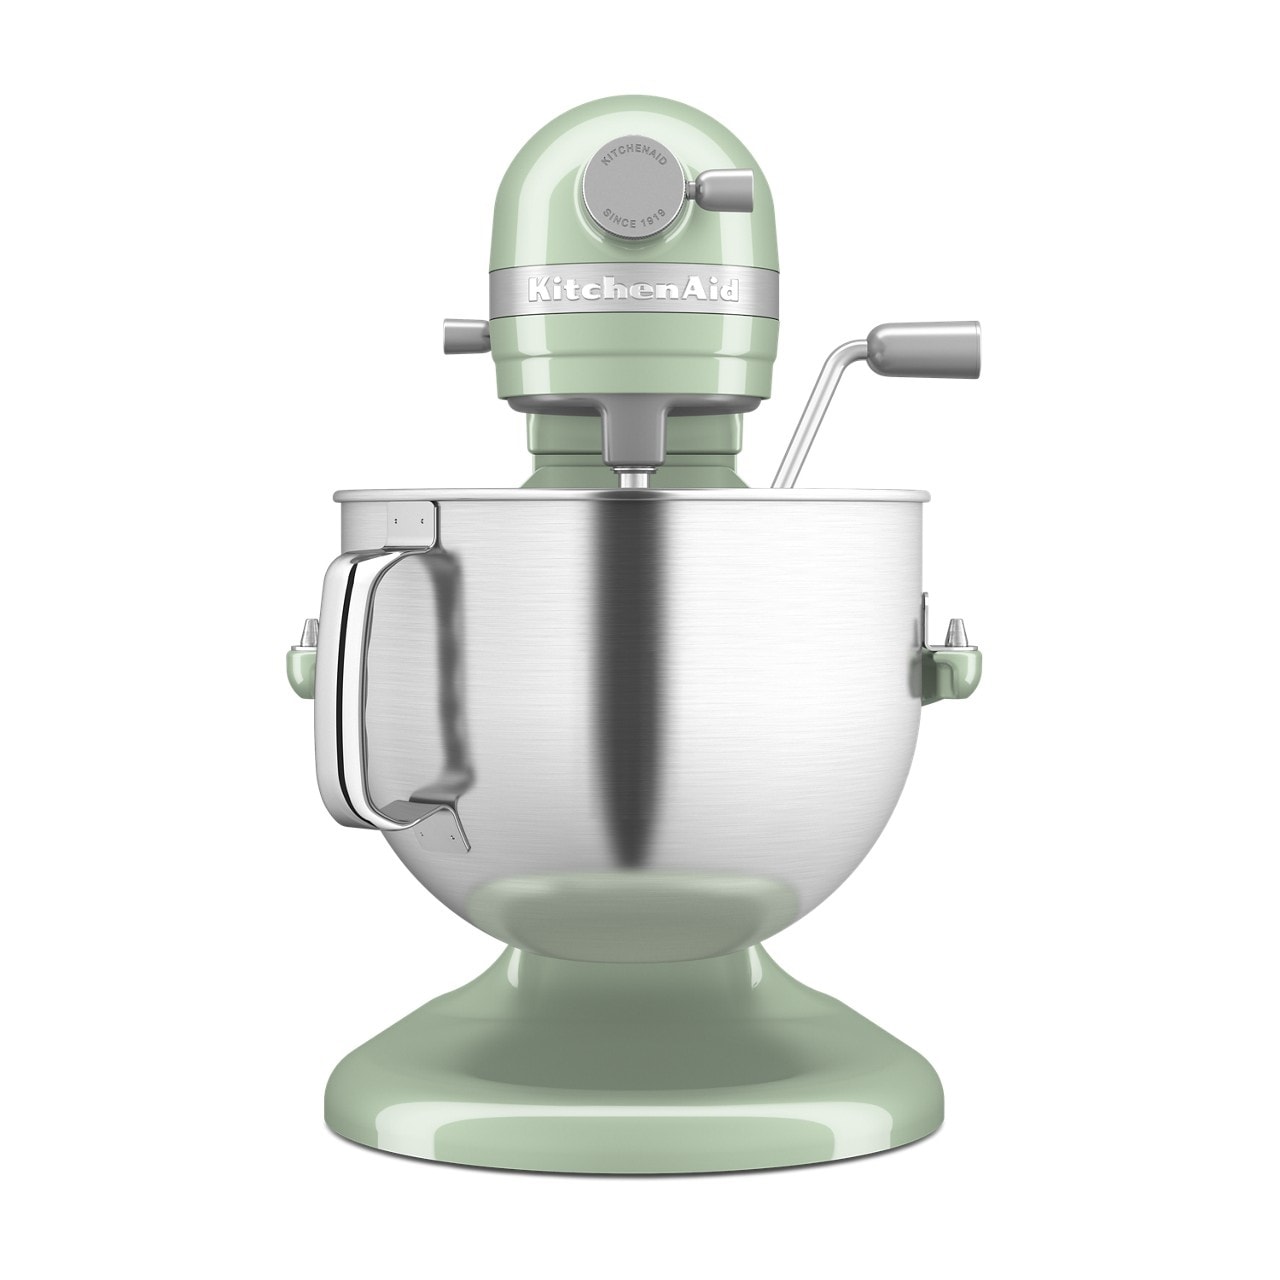 Whall Kinfai Electric Kitchen Stand Mixer Machine with 4.5 Quart